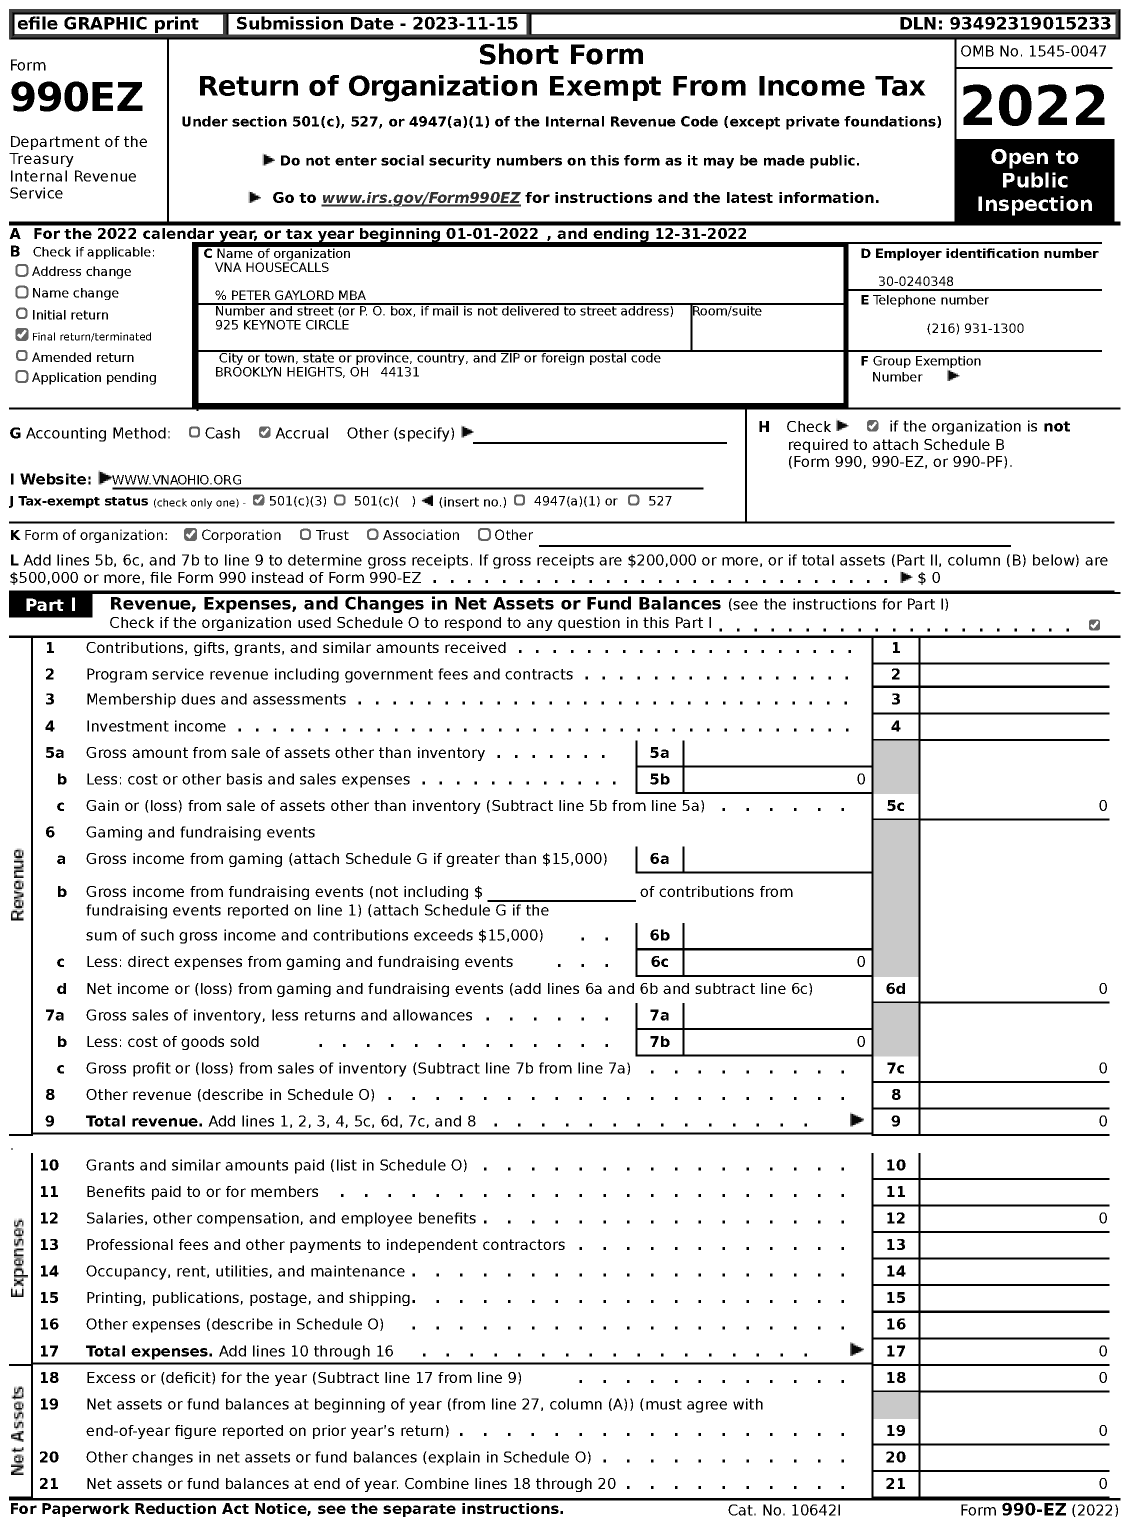 Image of first page of 2022 Form 990EZ for Vna Housecalls